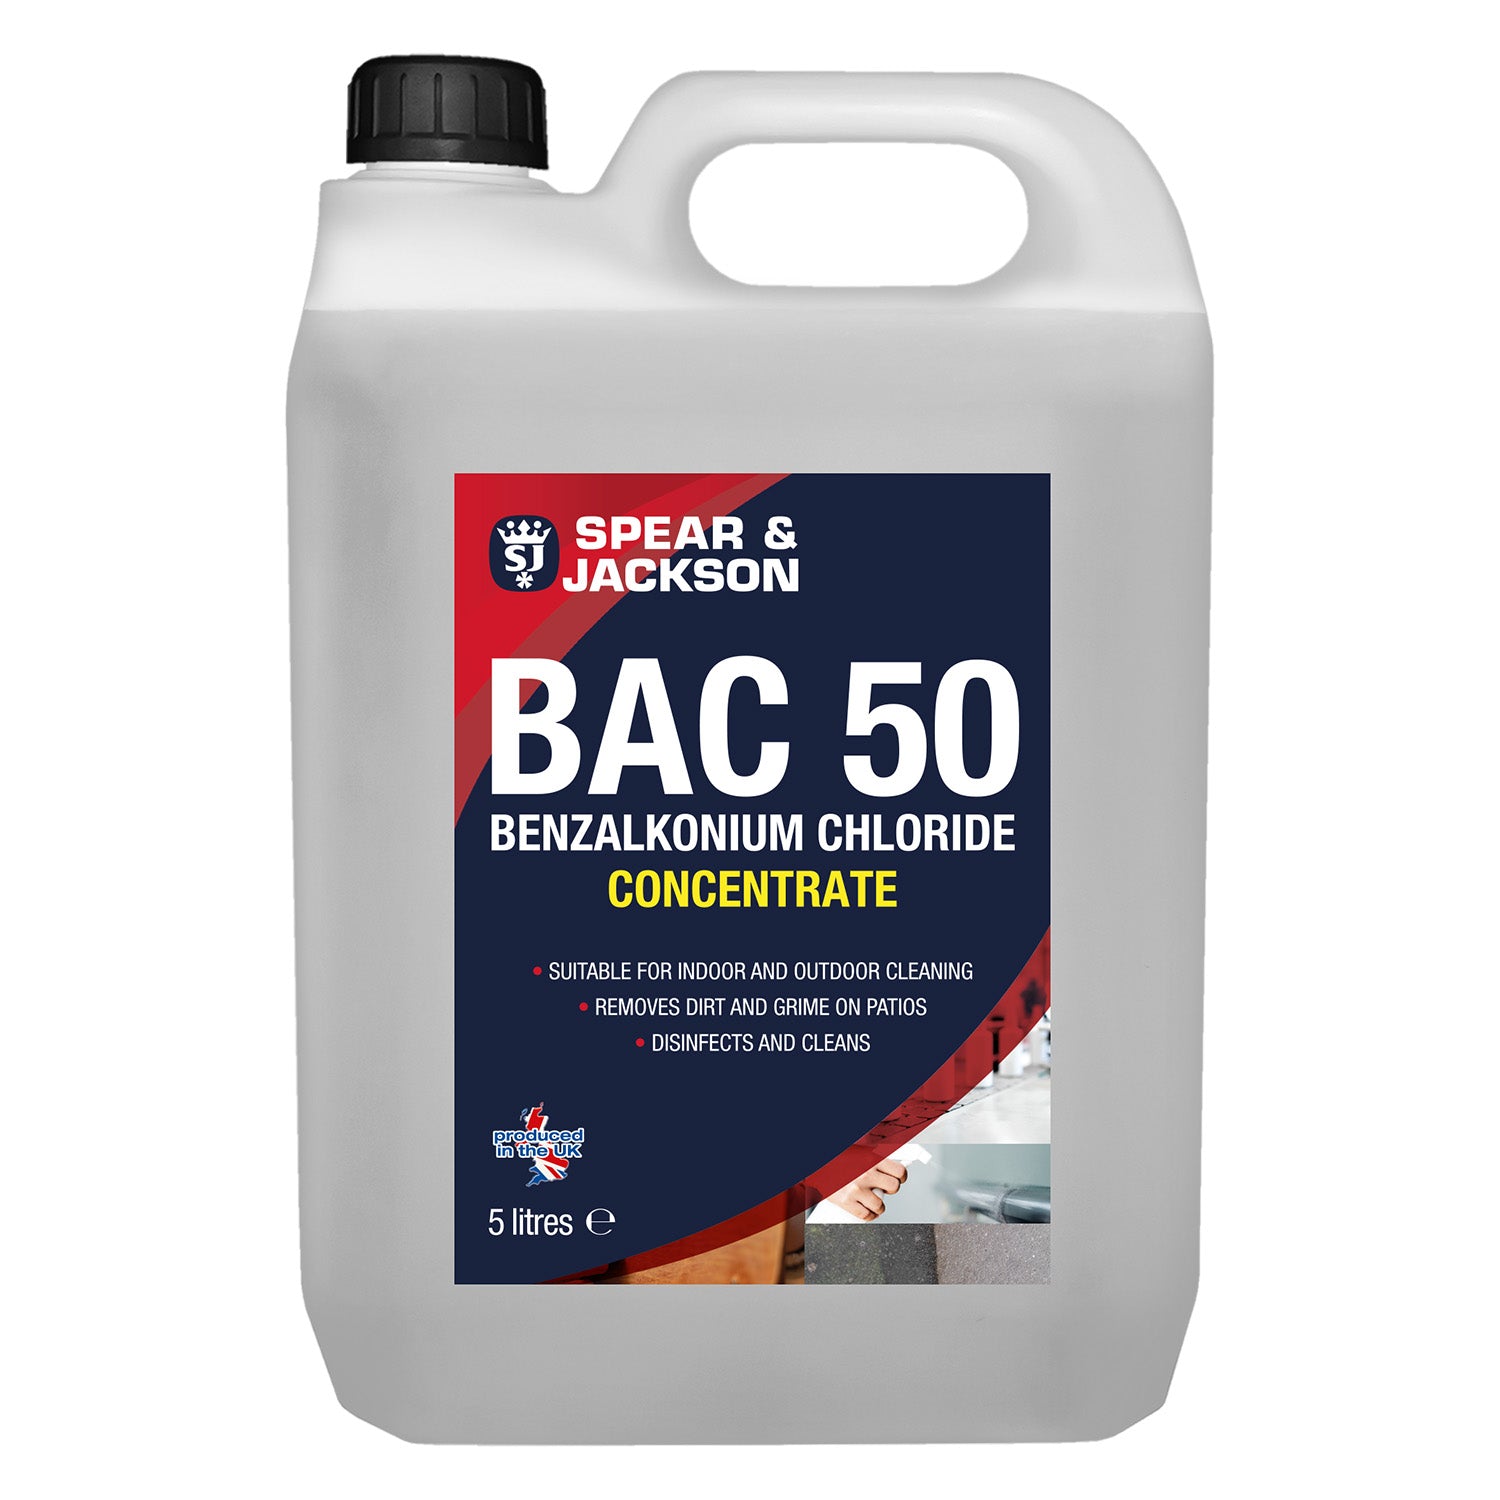 BAC 50 Benzalkonium Chloride Concentrated 5L Spear & Jackson